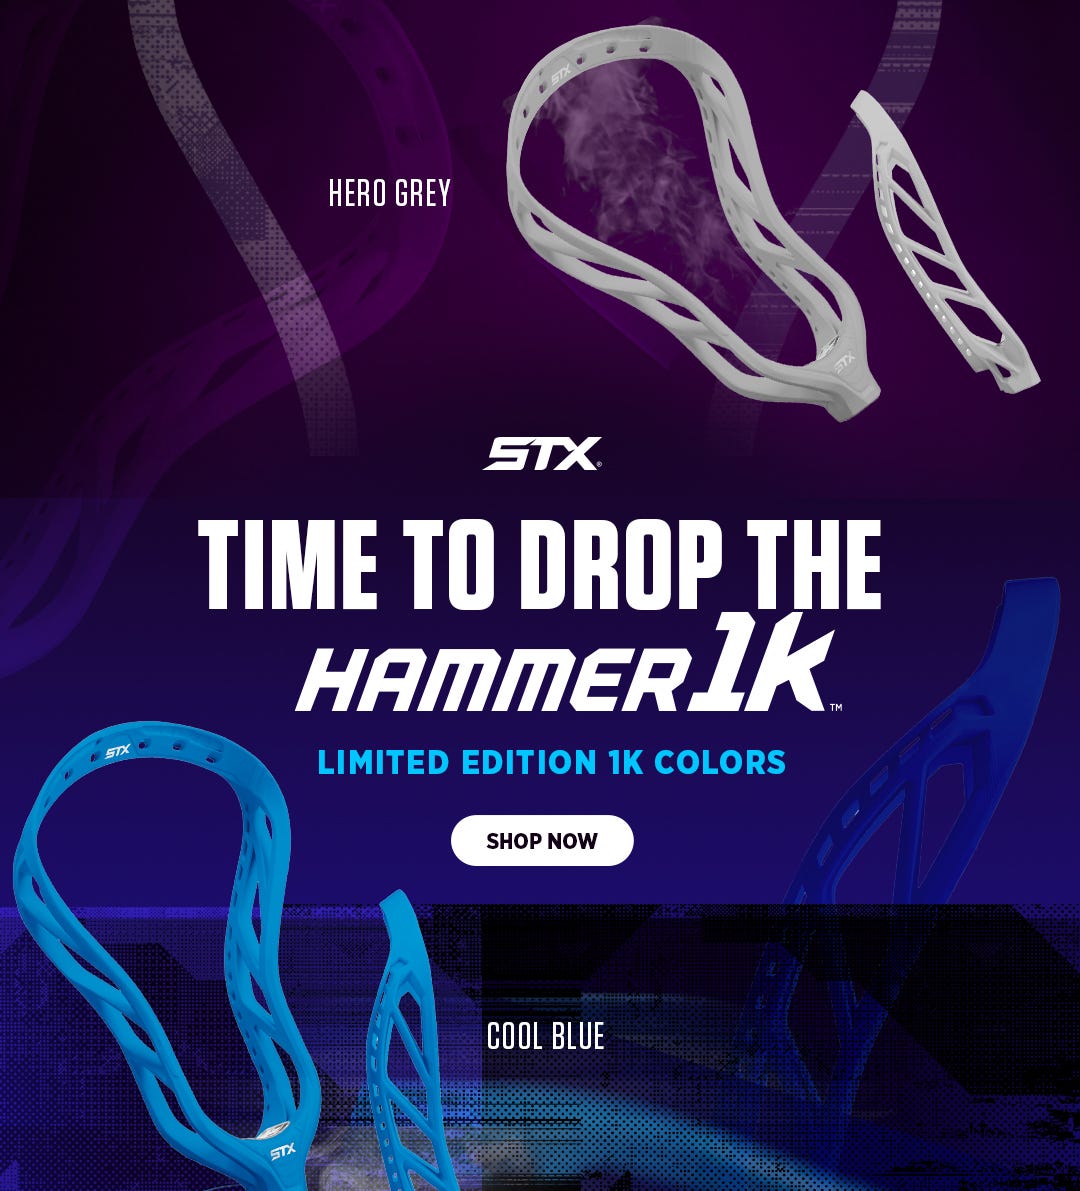 STX Hammer 1K Lacrosse Head Limited Edition Colors